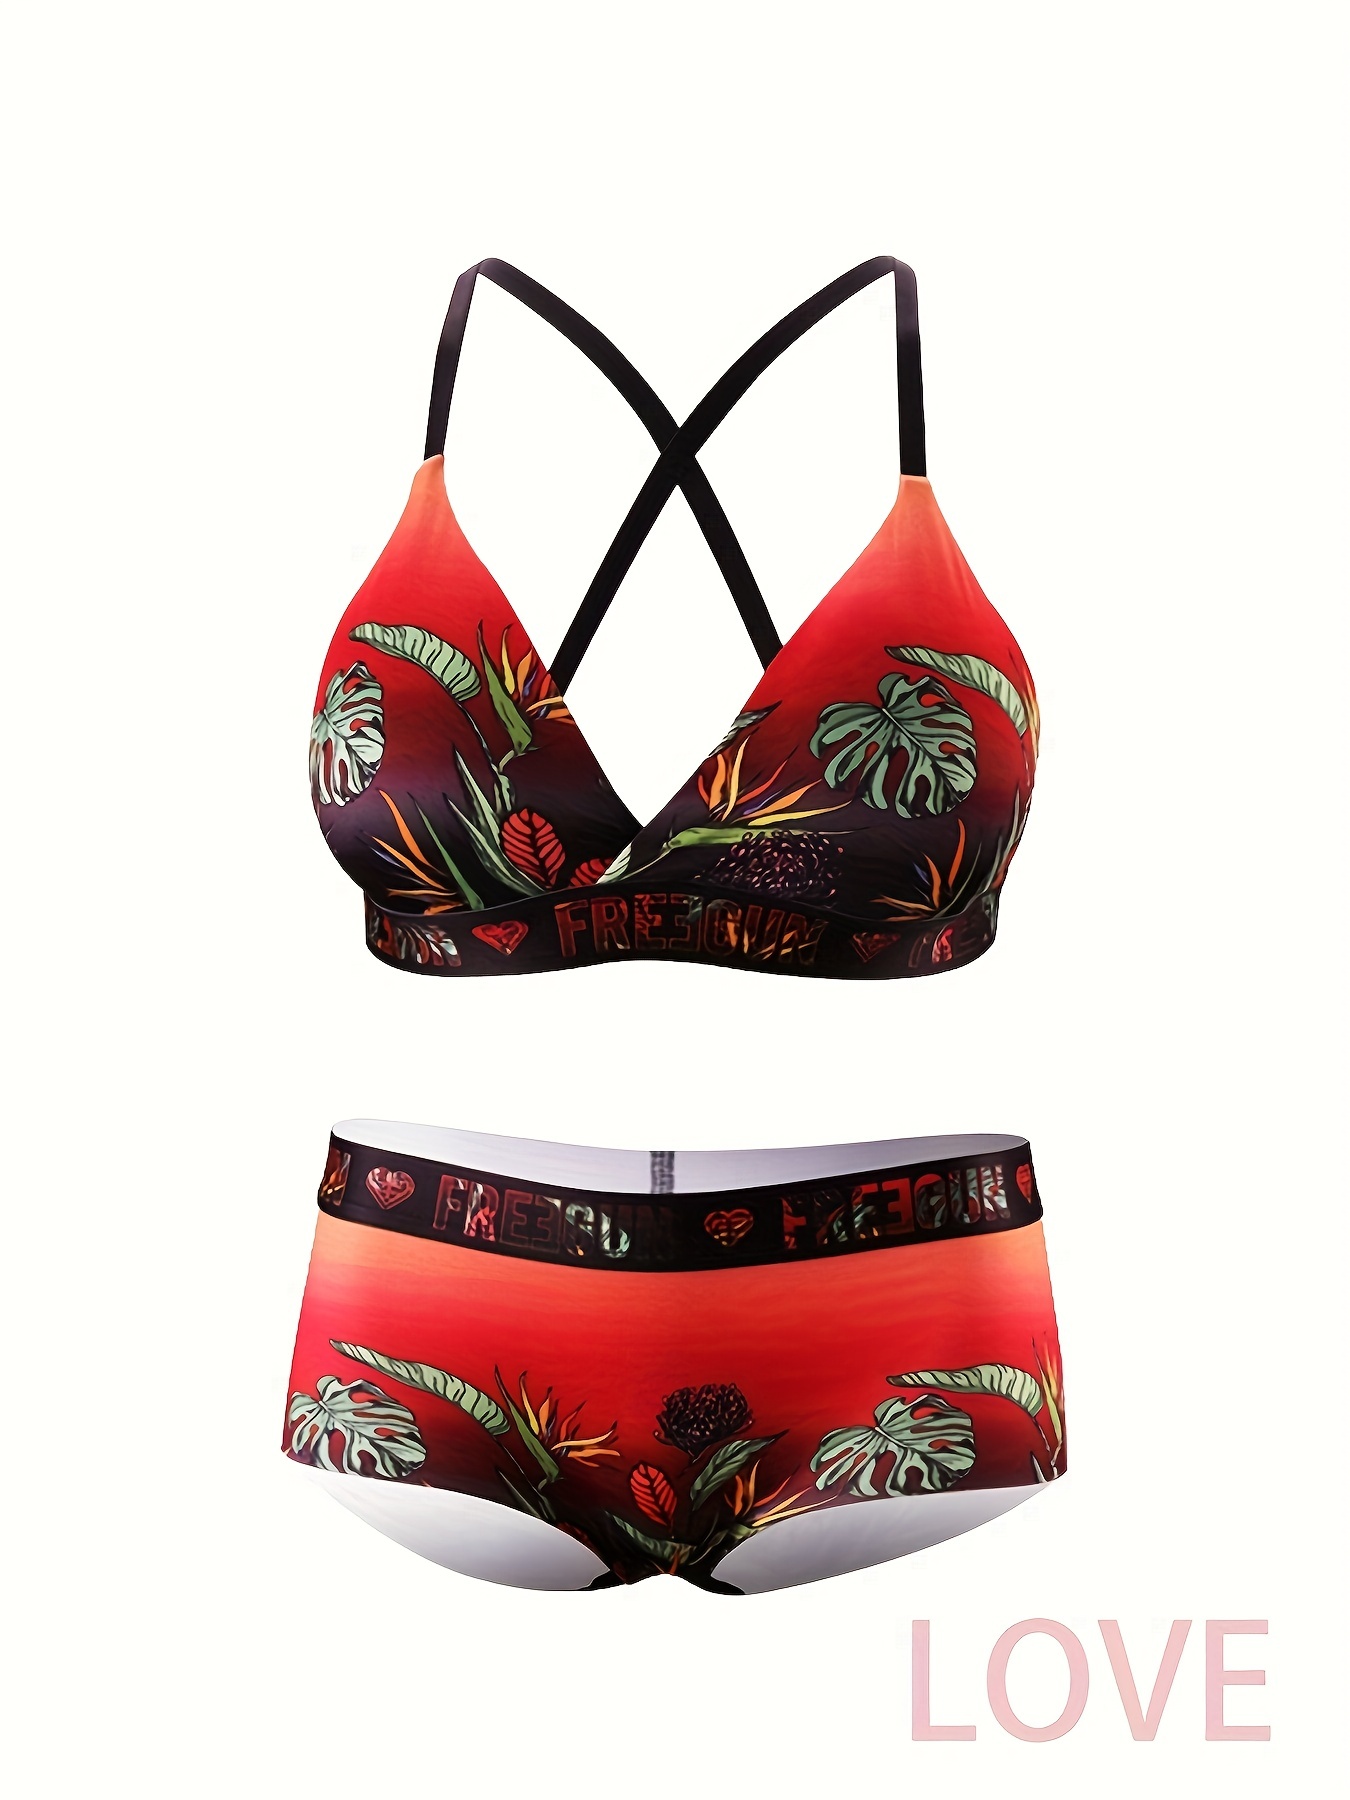 Red Women Lingerie Underwear Fashion Bra and Panty Set Comfortable